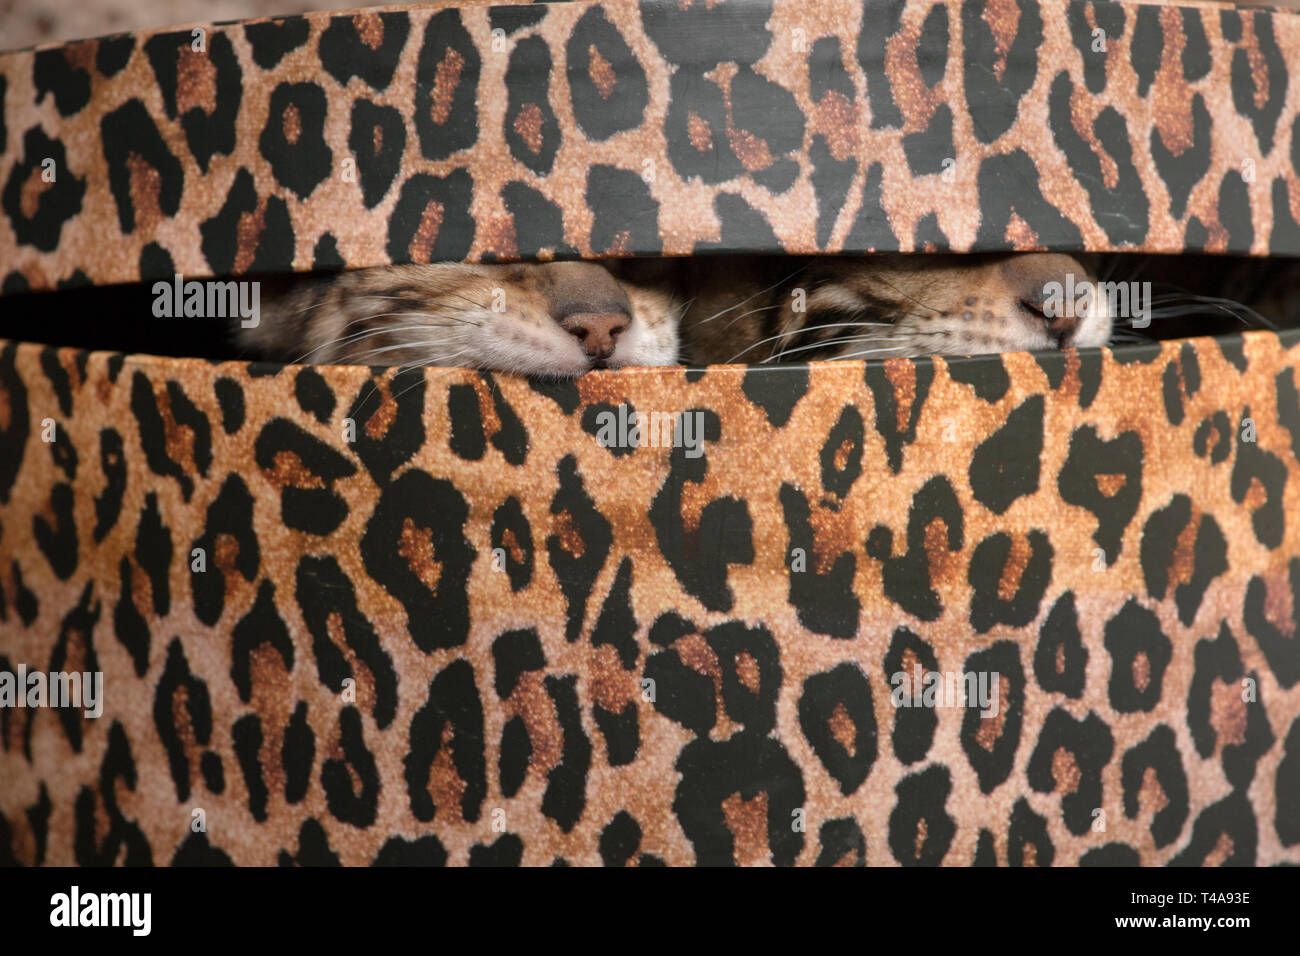 Just the noses and whisker pads of two bengal kittens poking out from a leopard print hatbox. Stock Photo